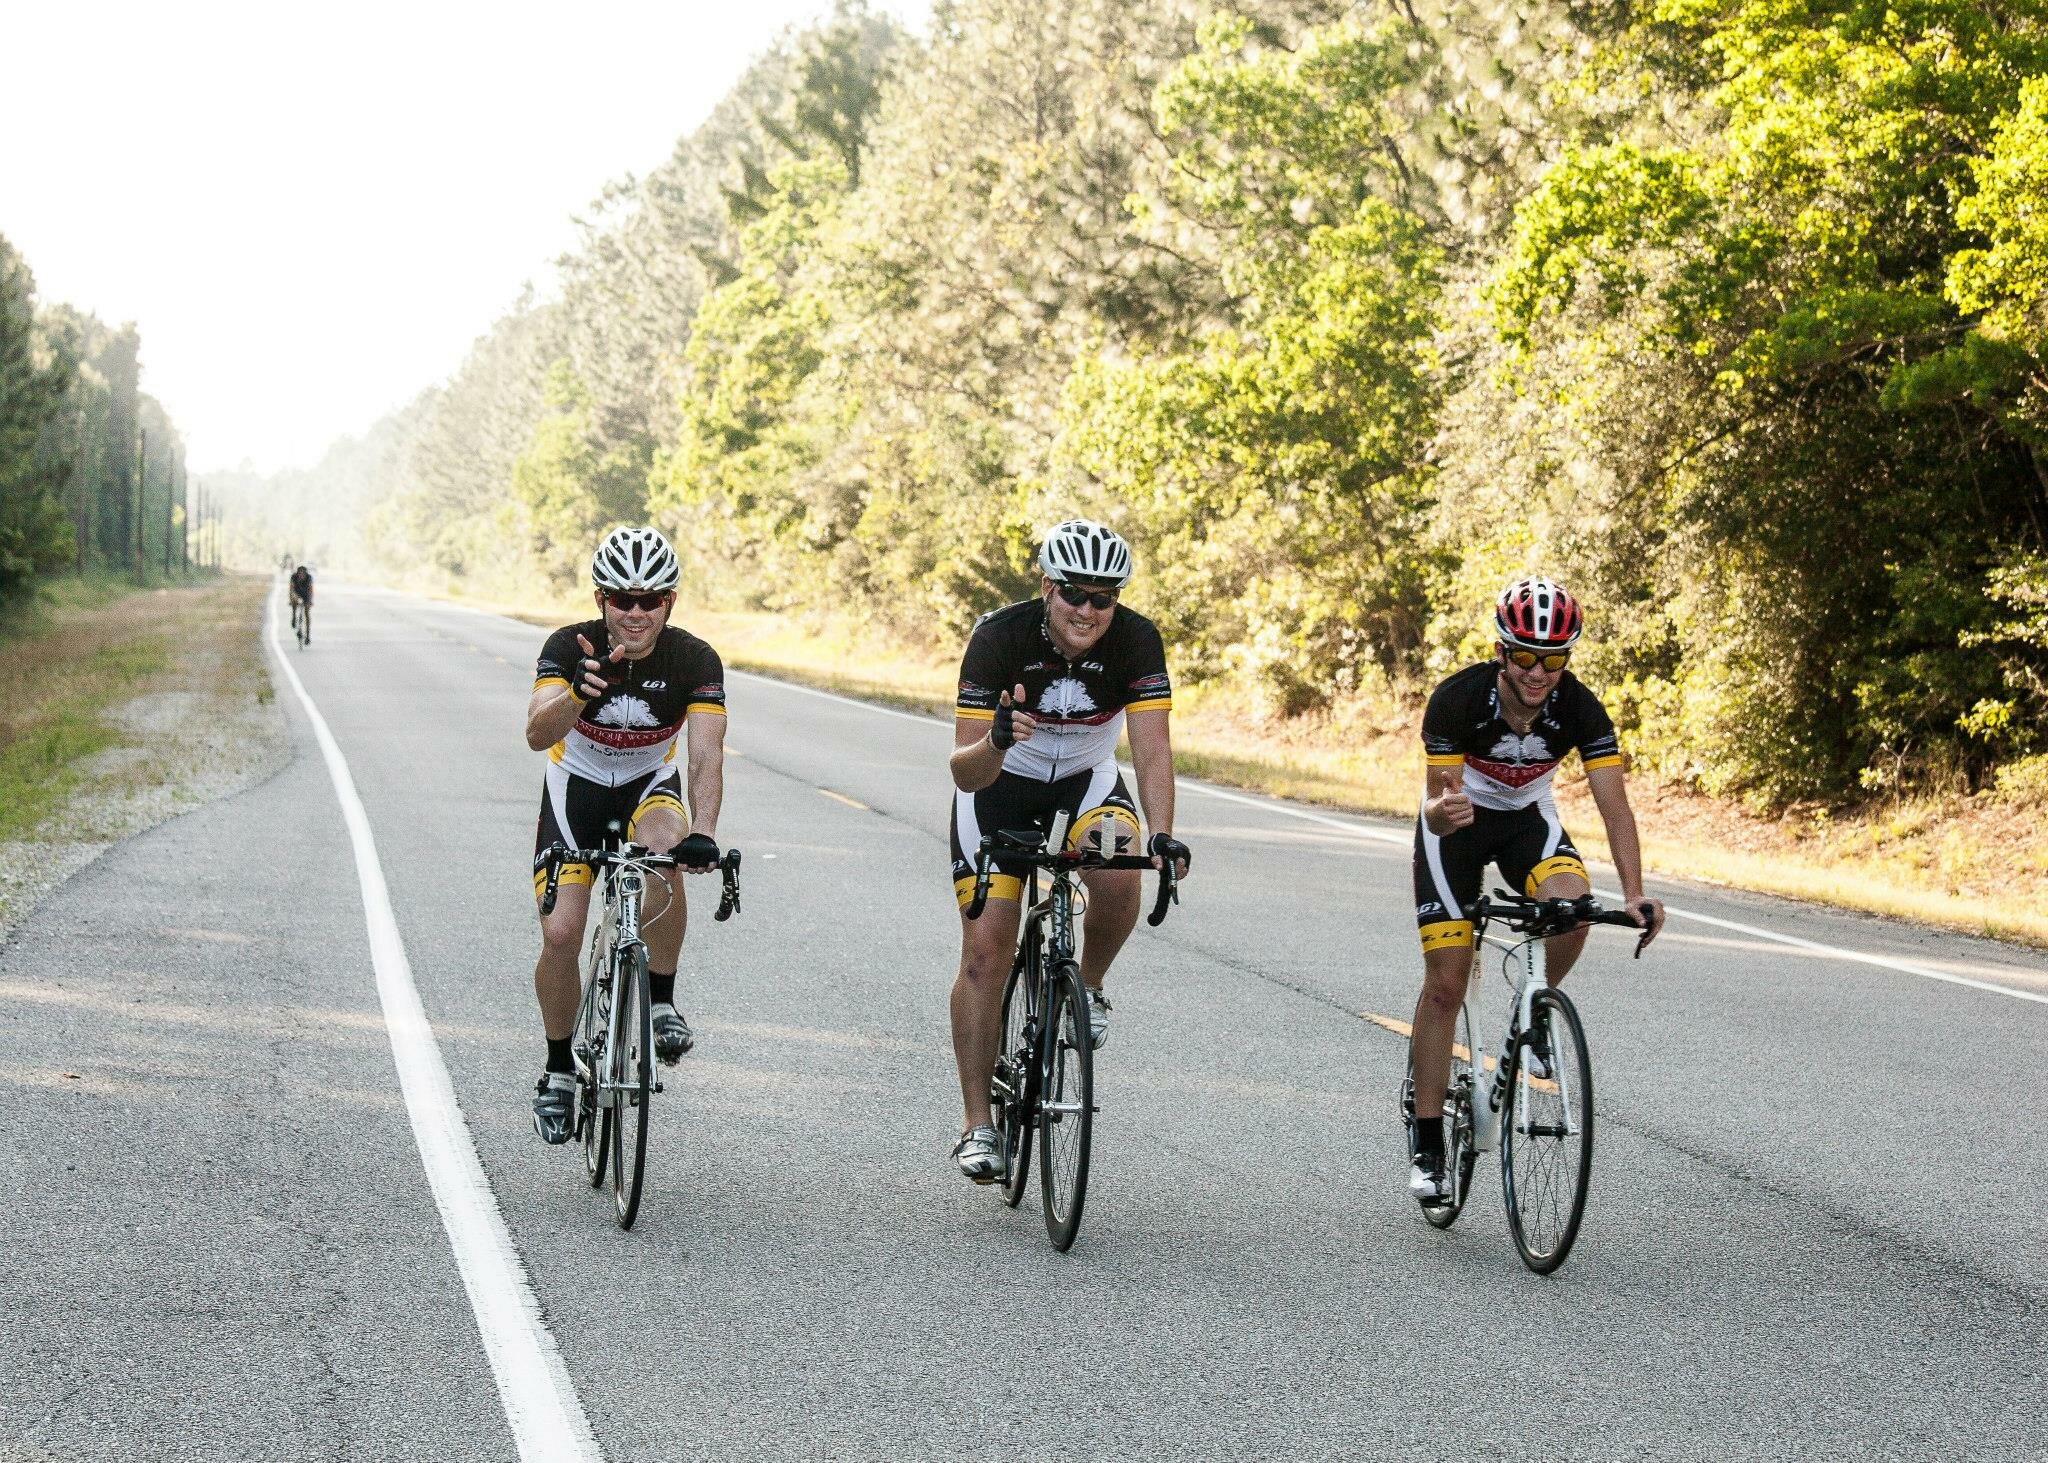 Riders near the finish of Race du Lac.